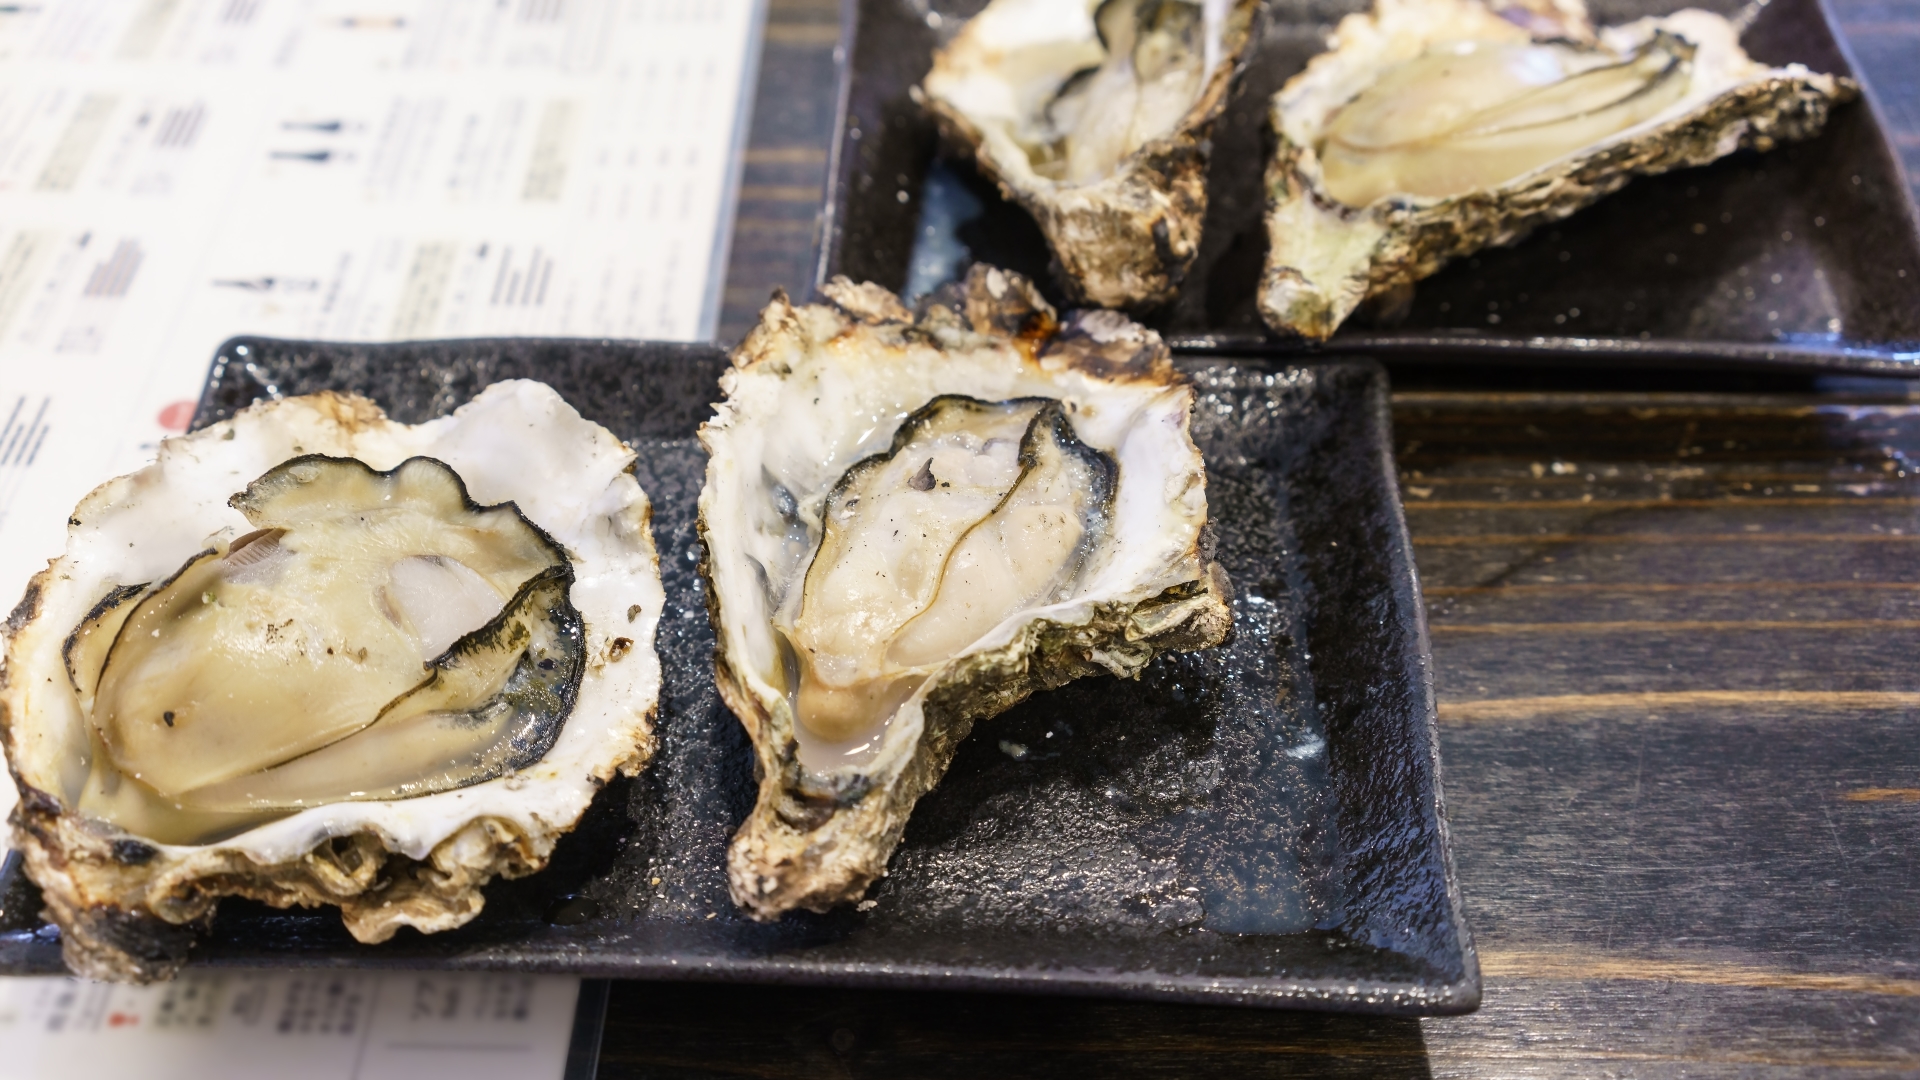 Oysters in Hiroshima